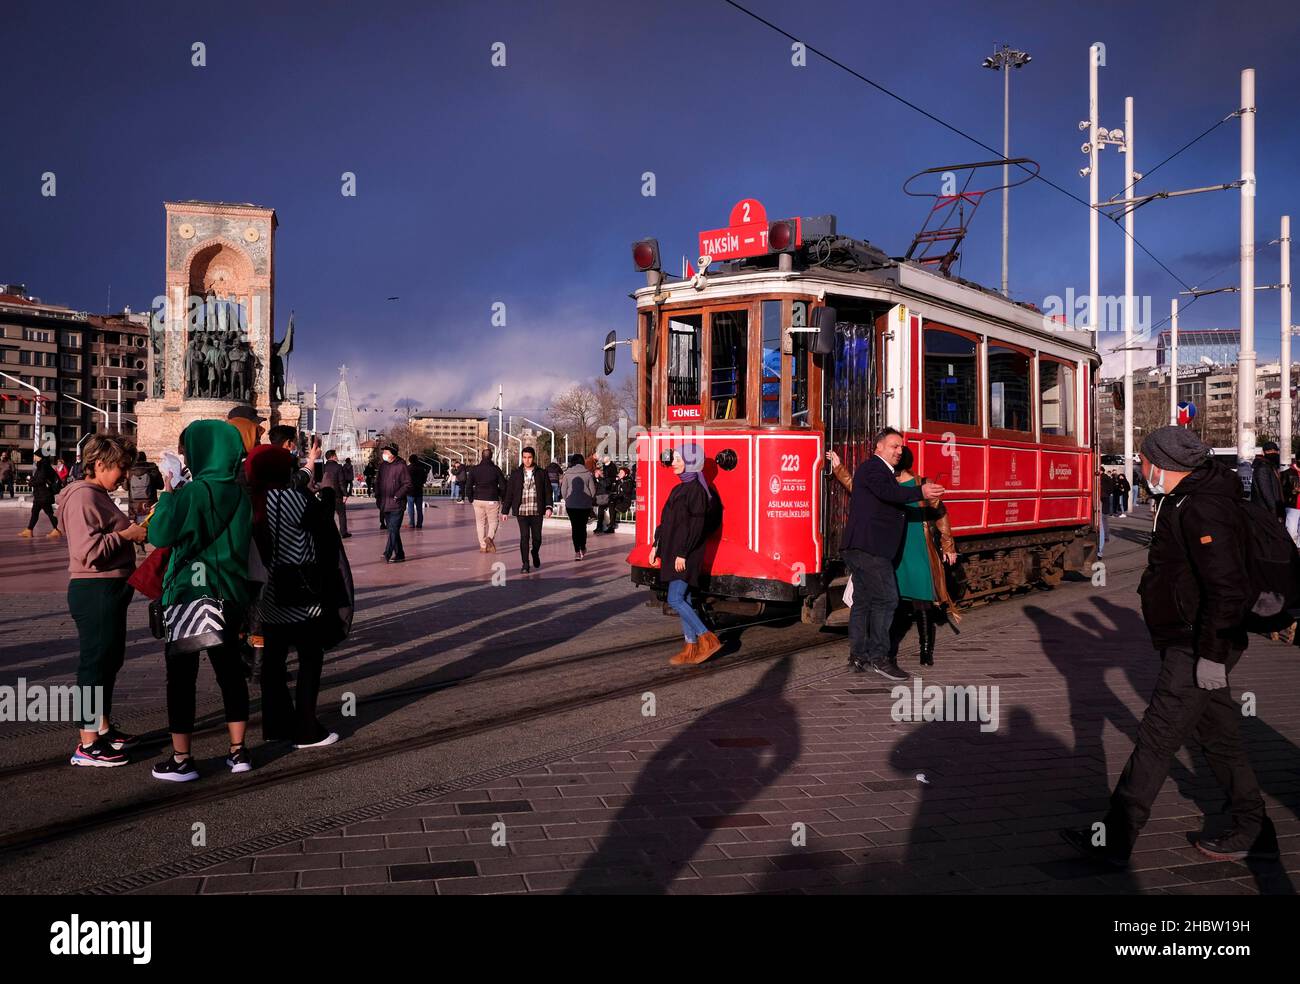 Istanbul, Istanbul, Turkey. 22nd Dec, 2021. Turkey is going through a very serious economic crisis. After a historical record low on December 20th 2021, the Turkish lira gained value on December 21st, after President ErdoÄŸan announced measures to bolster the currency. View of the Taksim Square, a touristic spot in Istanbul. (Credit Image: © Serkan Senturk/ZUMA Press Wire) Stock Photo